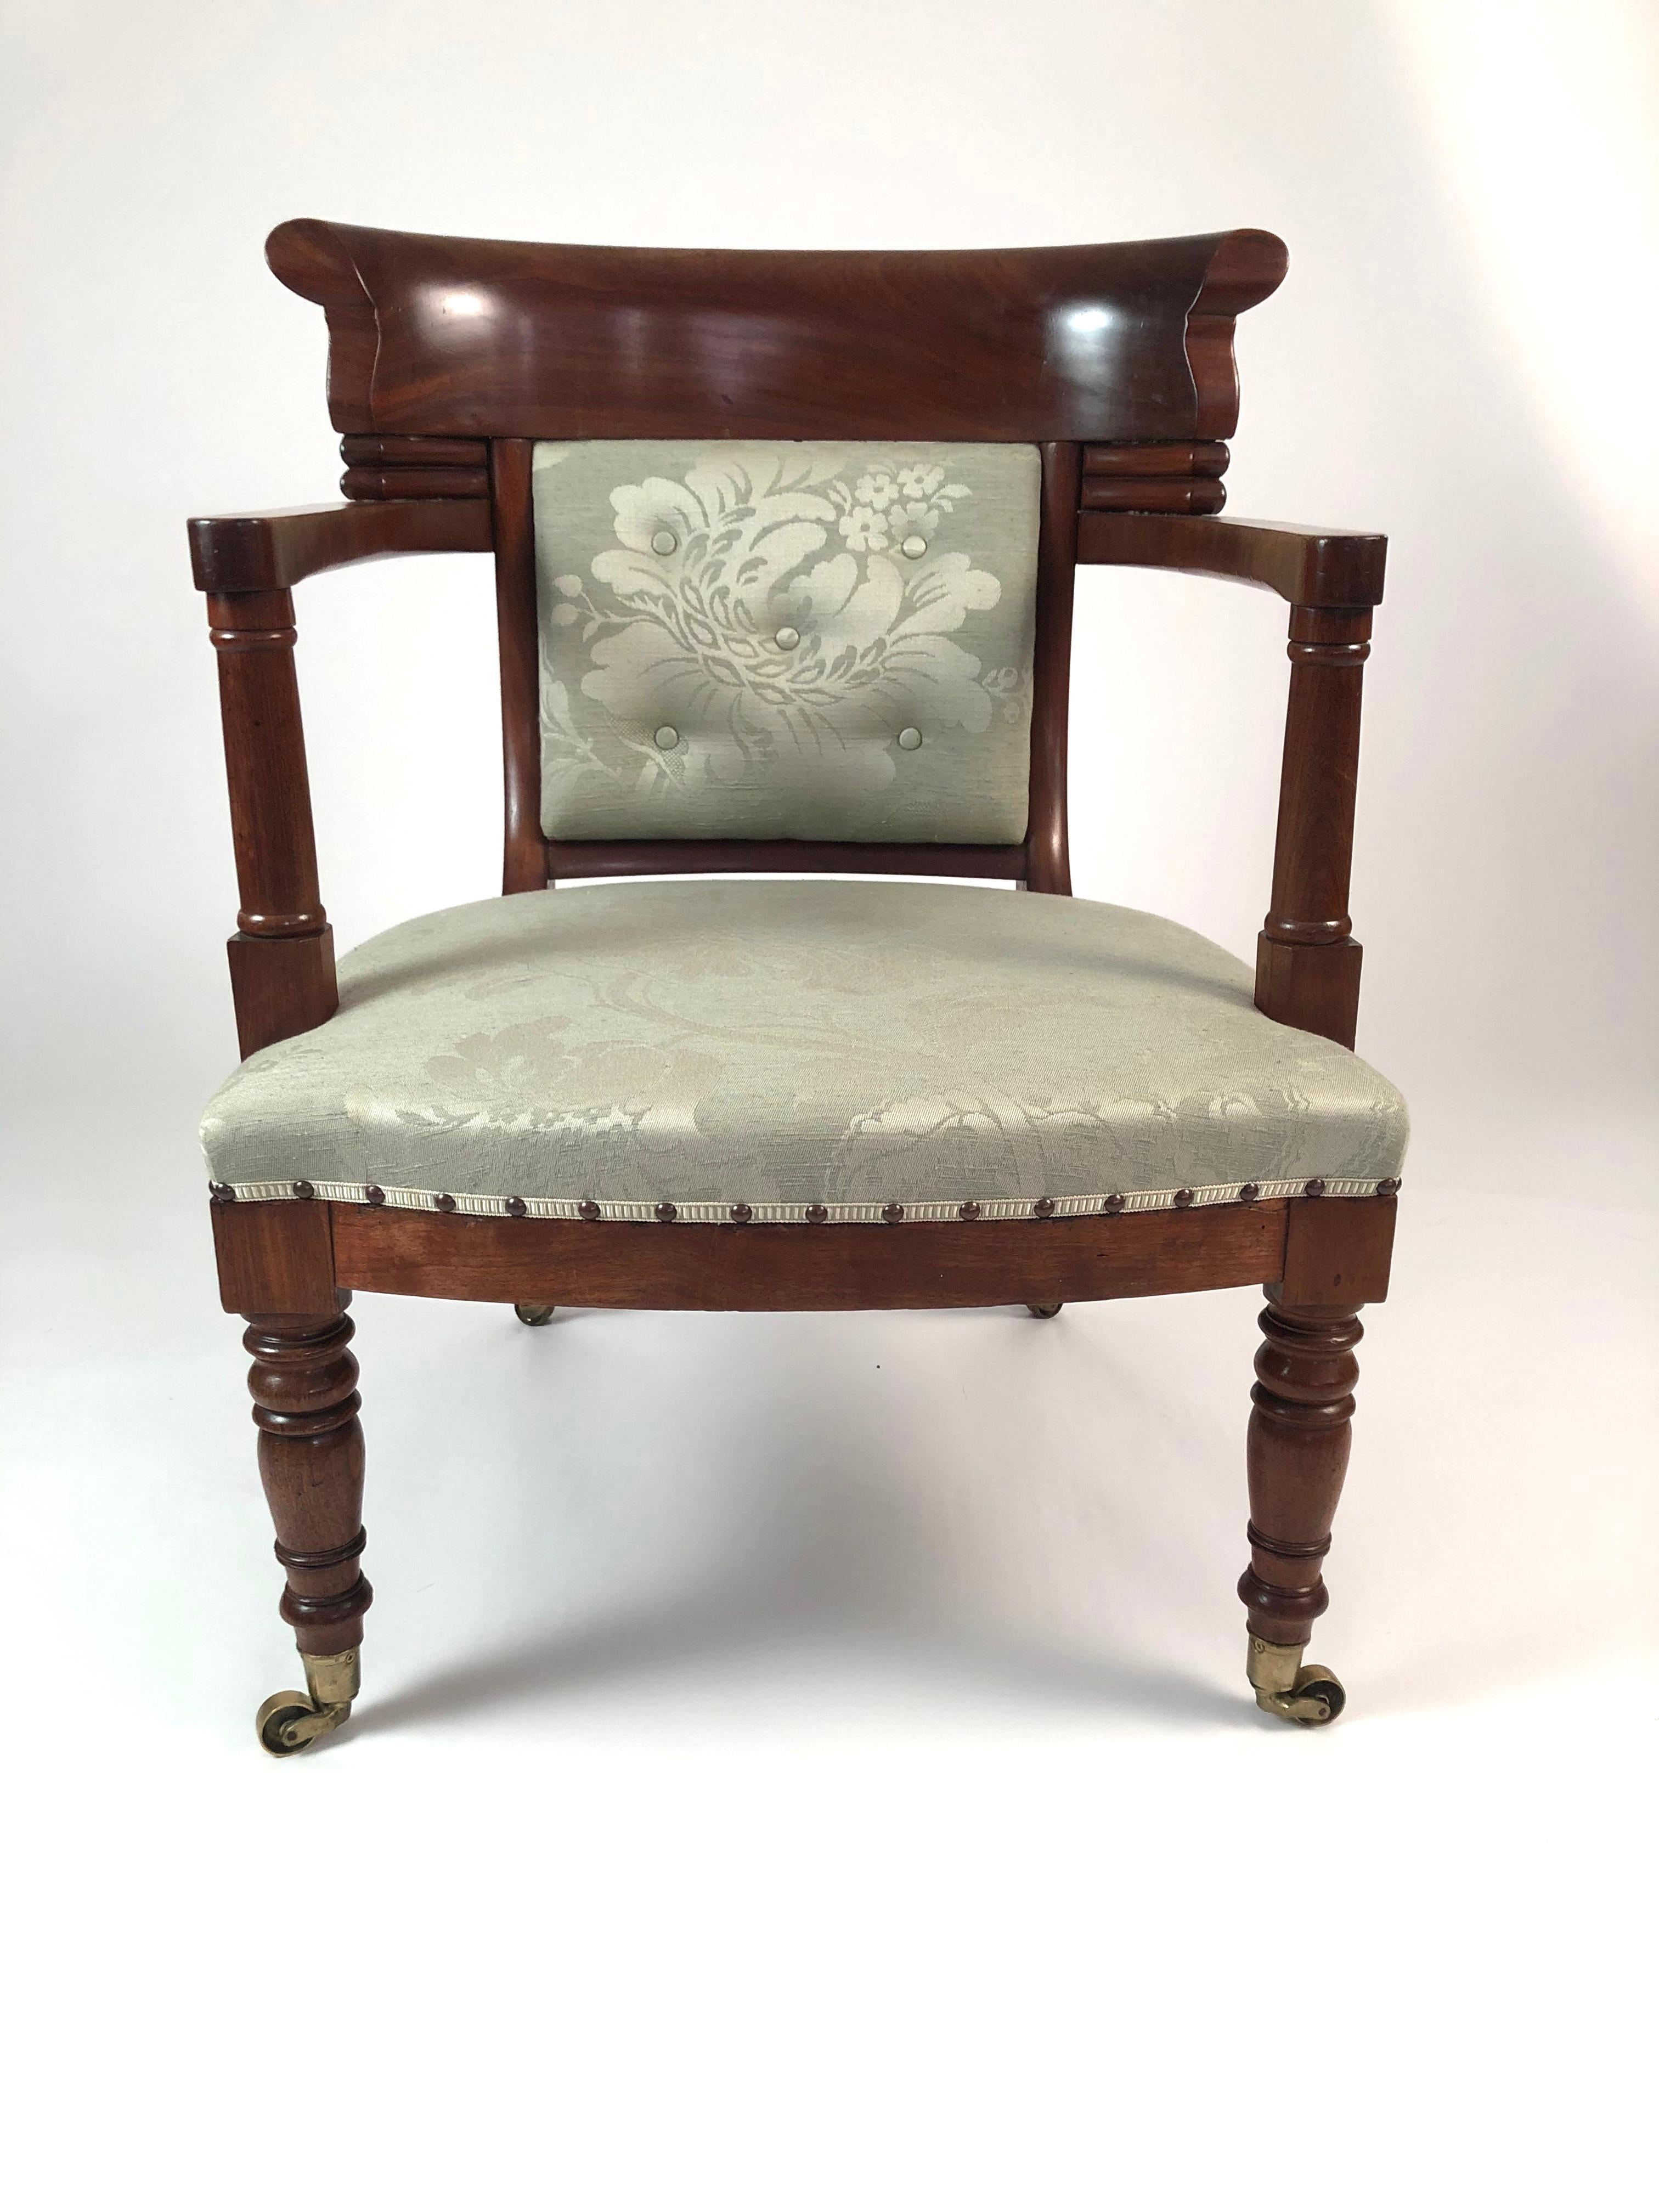 A generously proportioned 19th century French Empire period fauteuil in mahogany, the curved tablet back with bold channel carving supported by curved arms over columnar supports, over a high quality celadon green damask upholstered seat supported